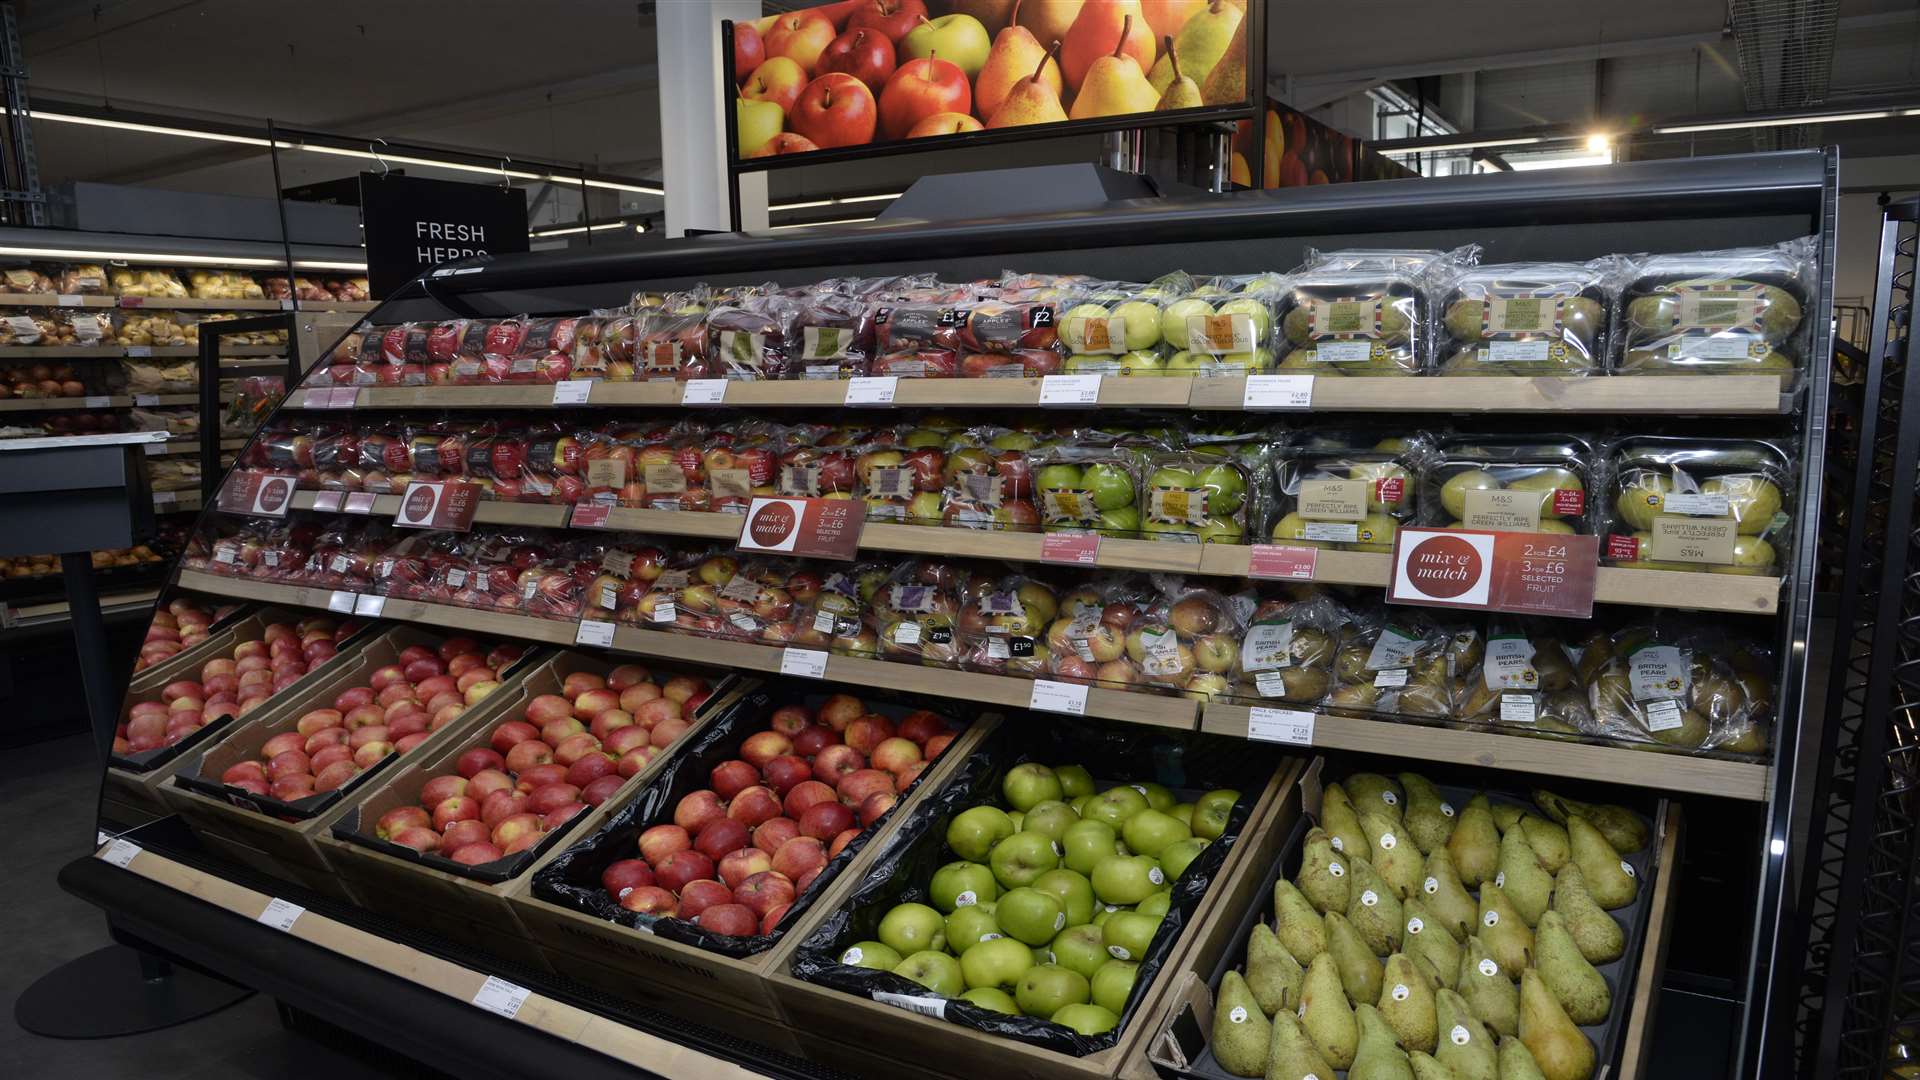 A fresh produce display at an M&S Foodhall in Sittingbourne